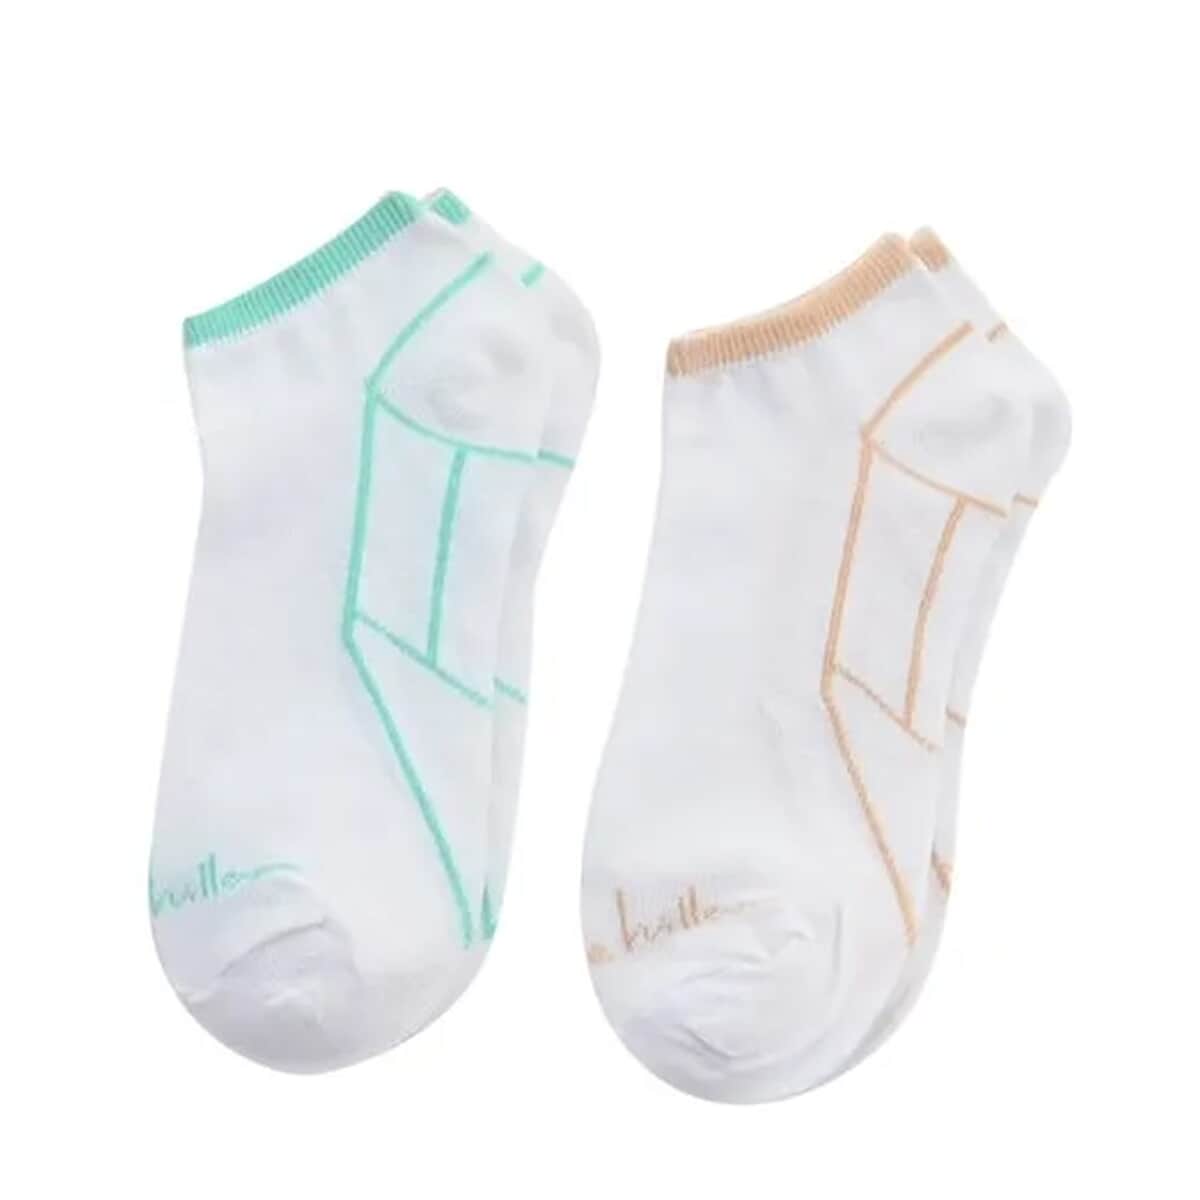 TLV Nicole Miller 10 Pairs No Show Socks (Sizes 4-10) - White/Multi (Ships in 8-10 business days) image number 5